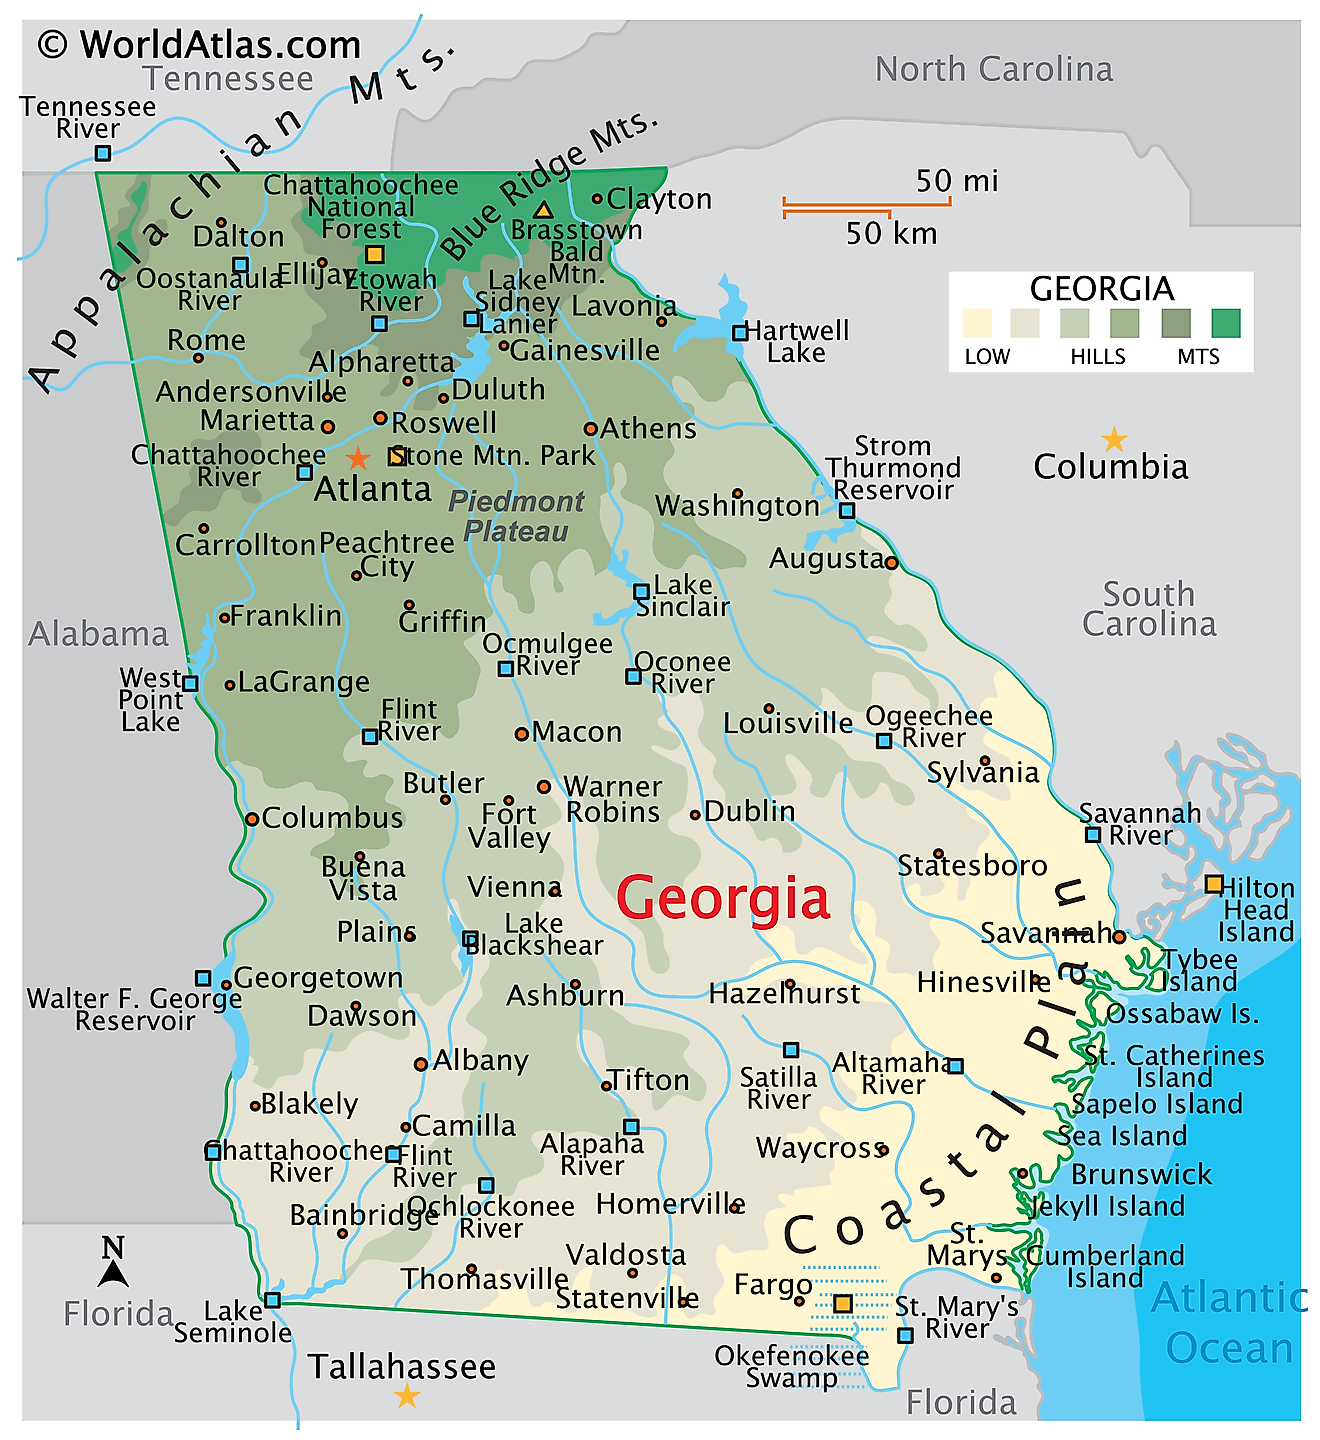 Physical Map of Georgia. It shows the physical features of Georgia including its mountain ranges, rivers, and lakes.